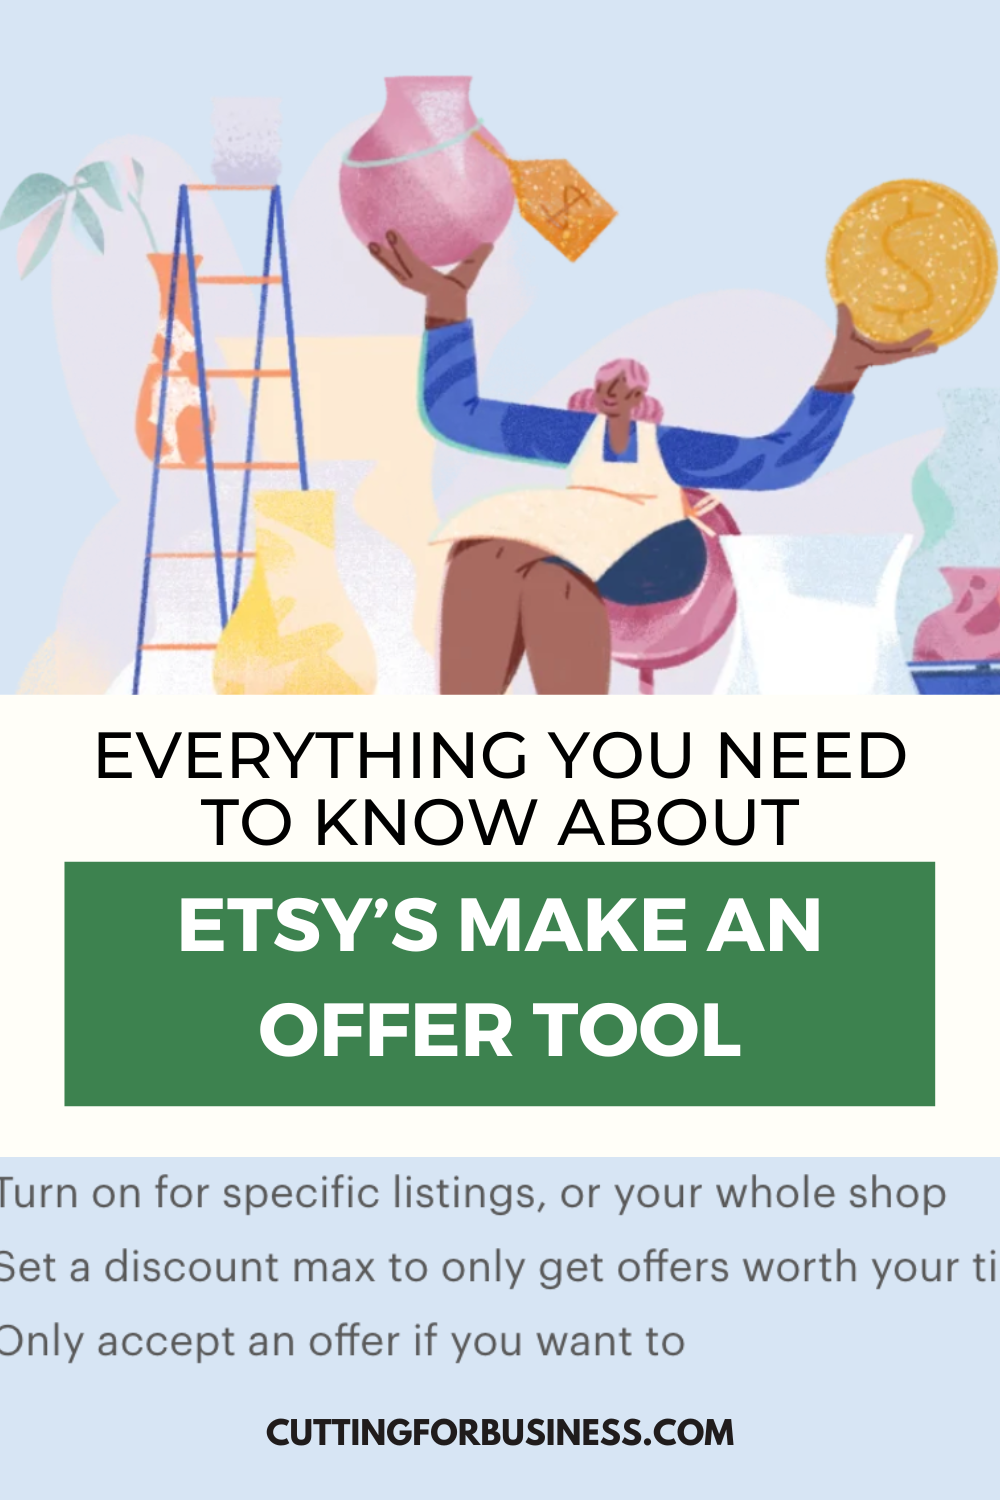 Etsy's Make an Offer Tool - cuttingforbusiness.com